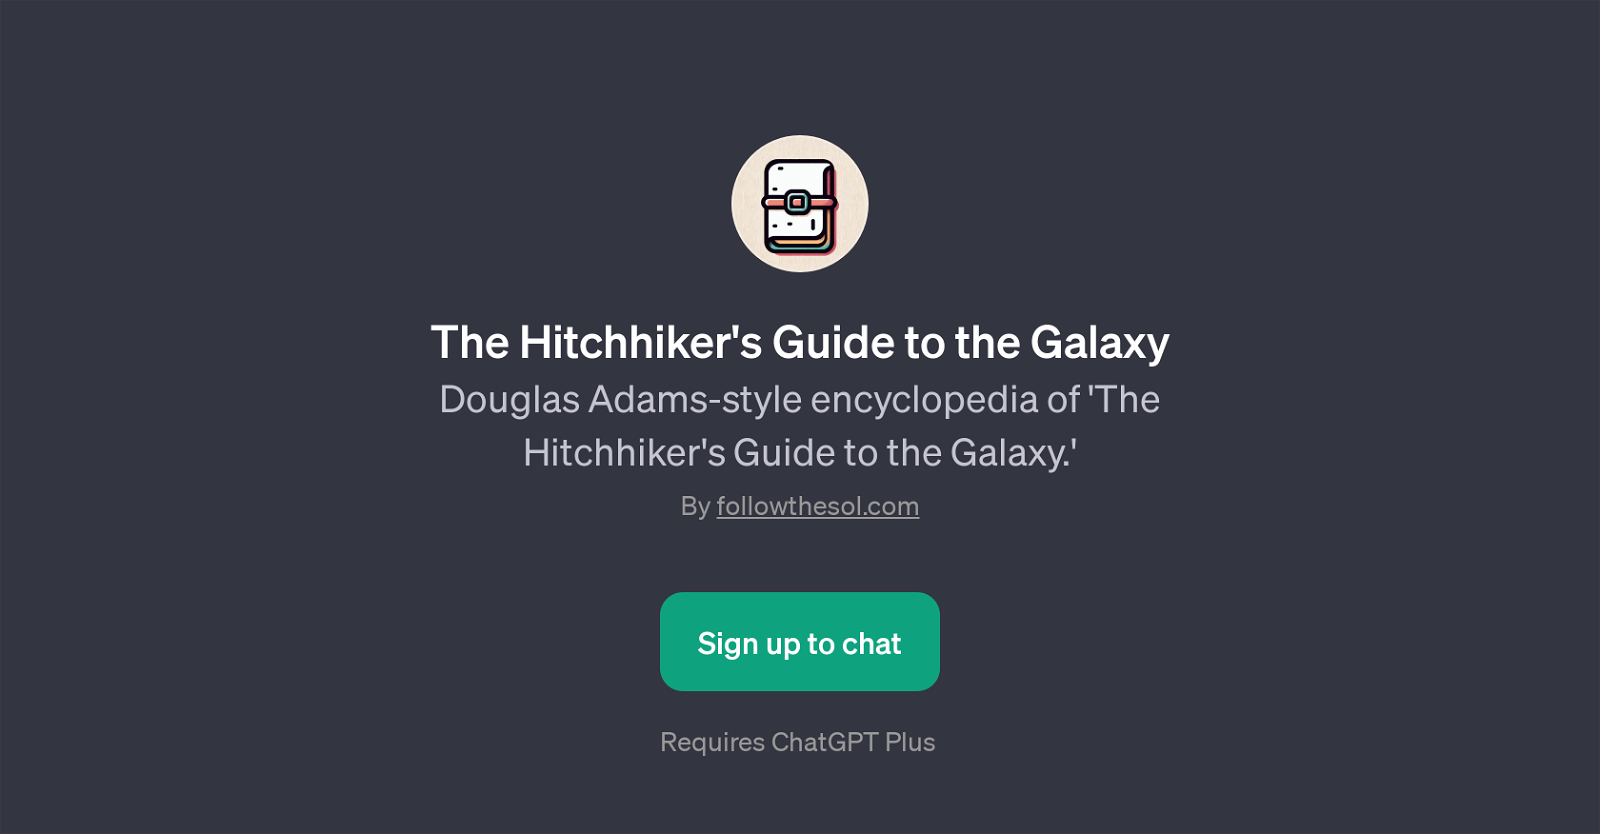 The Hitchhiker's Guide to the Galaxy website